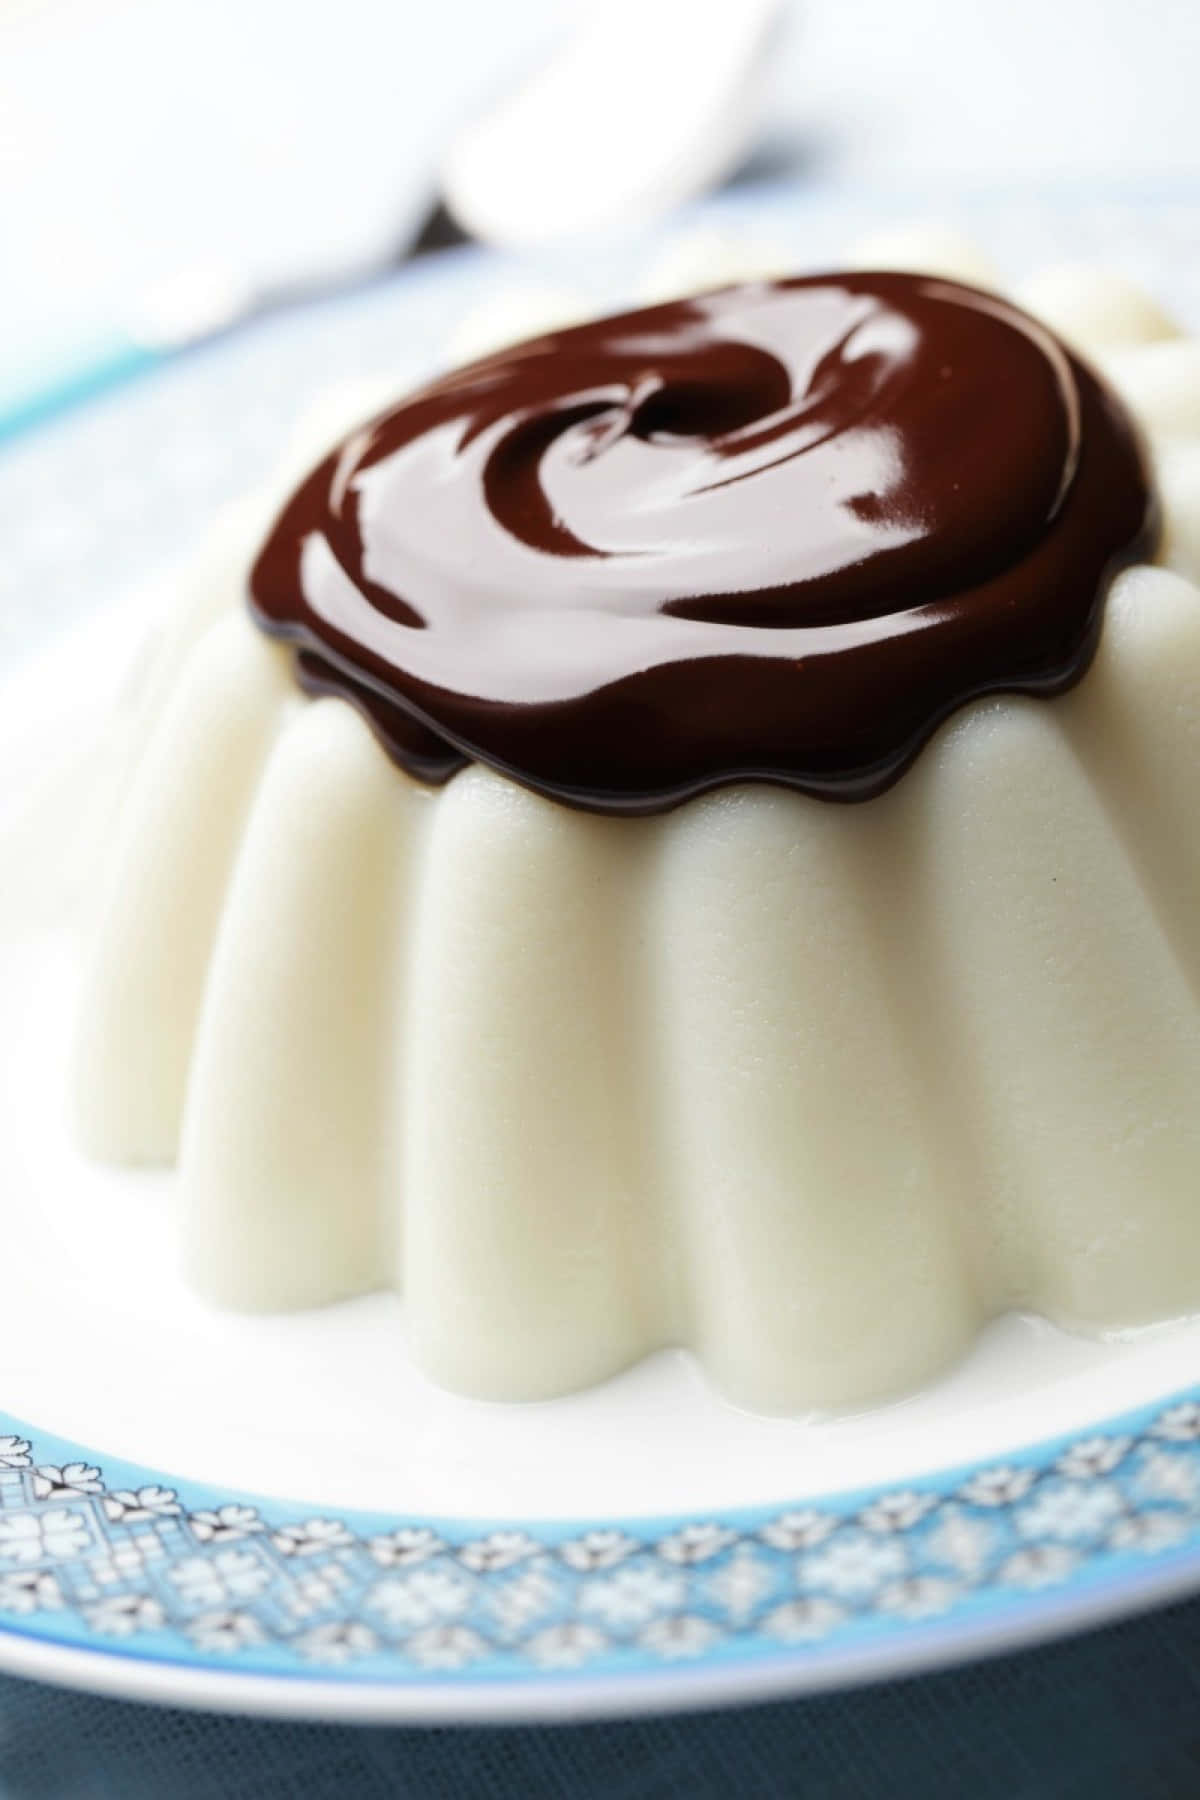 "A Blancmange dessert: sweet, light and delicious!" Wallpaper